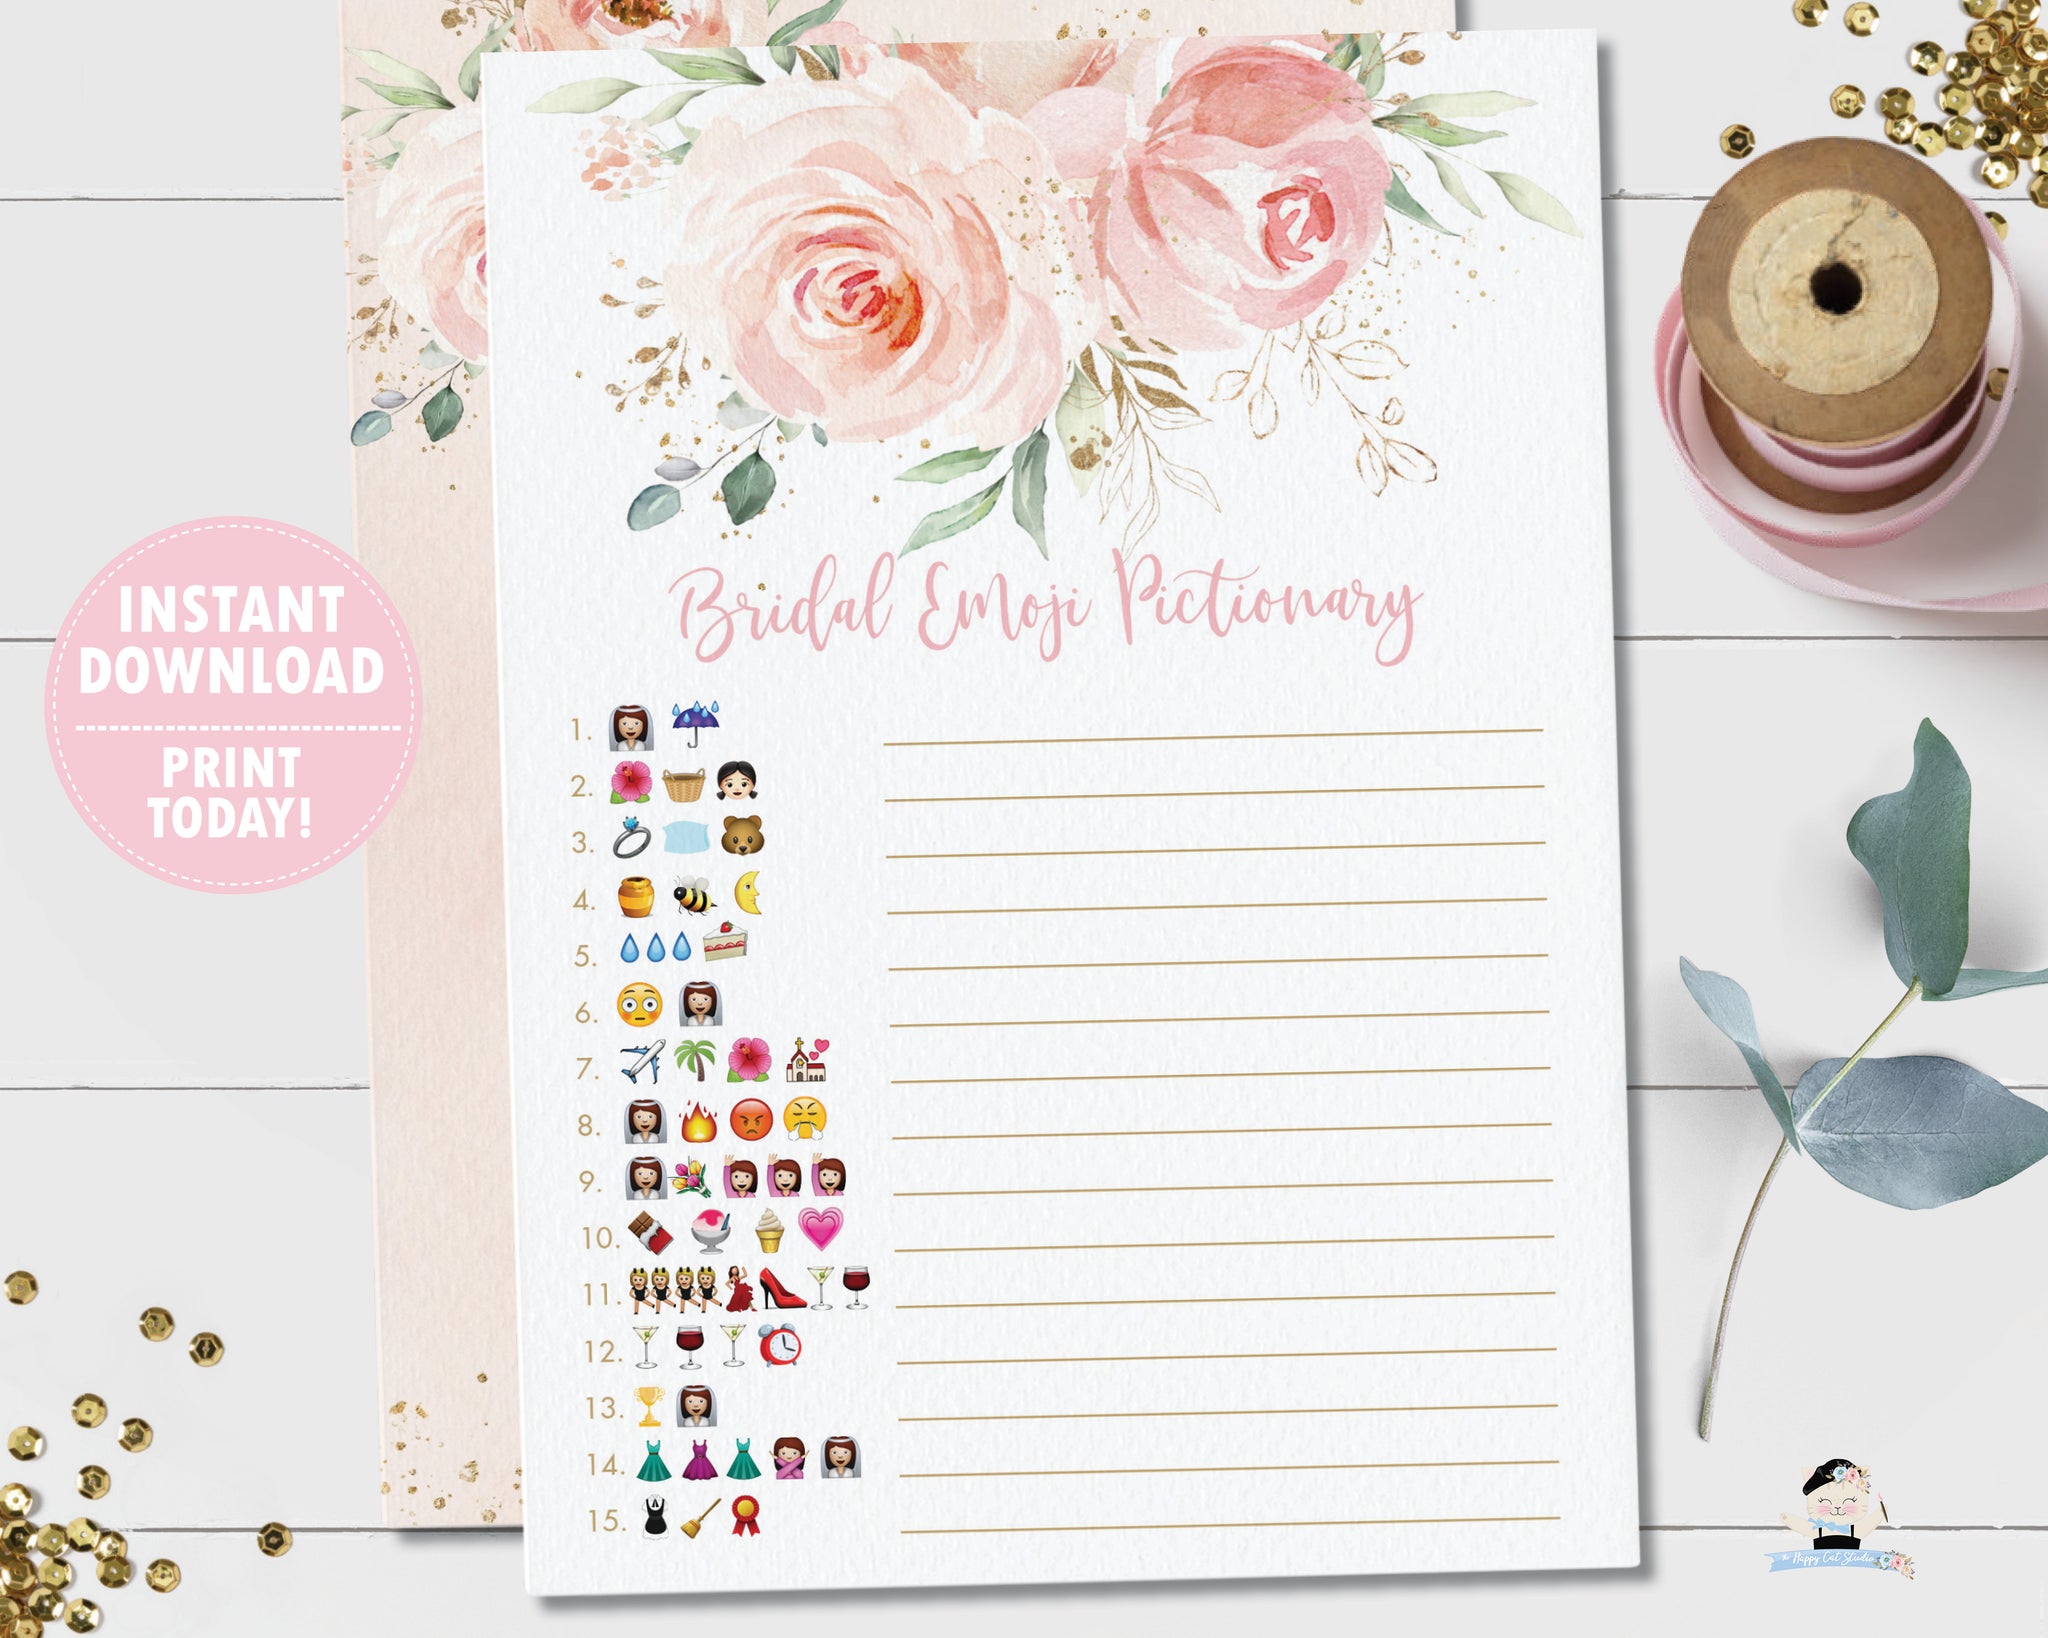 Chic Blush Pink Floral Gold Bridal Shower Emoji Pictionary Game Inst The Happy Cat Studio